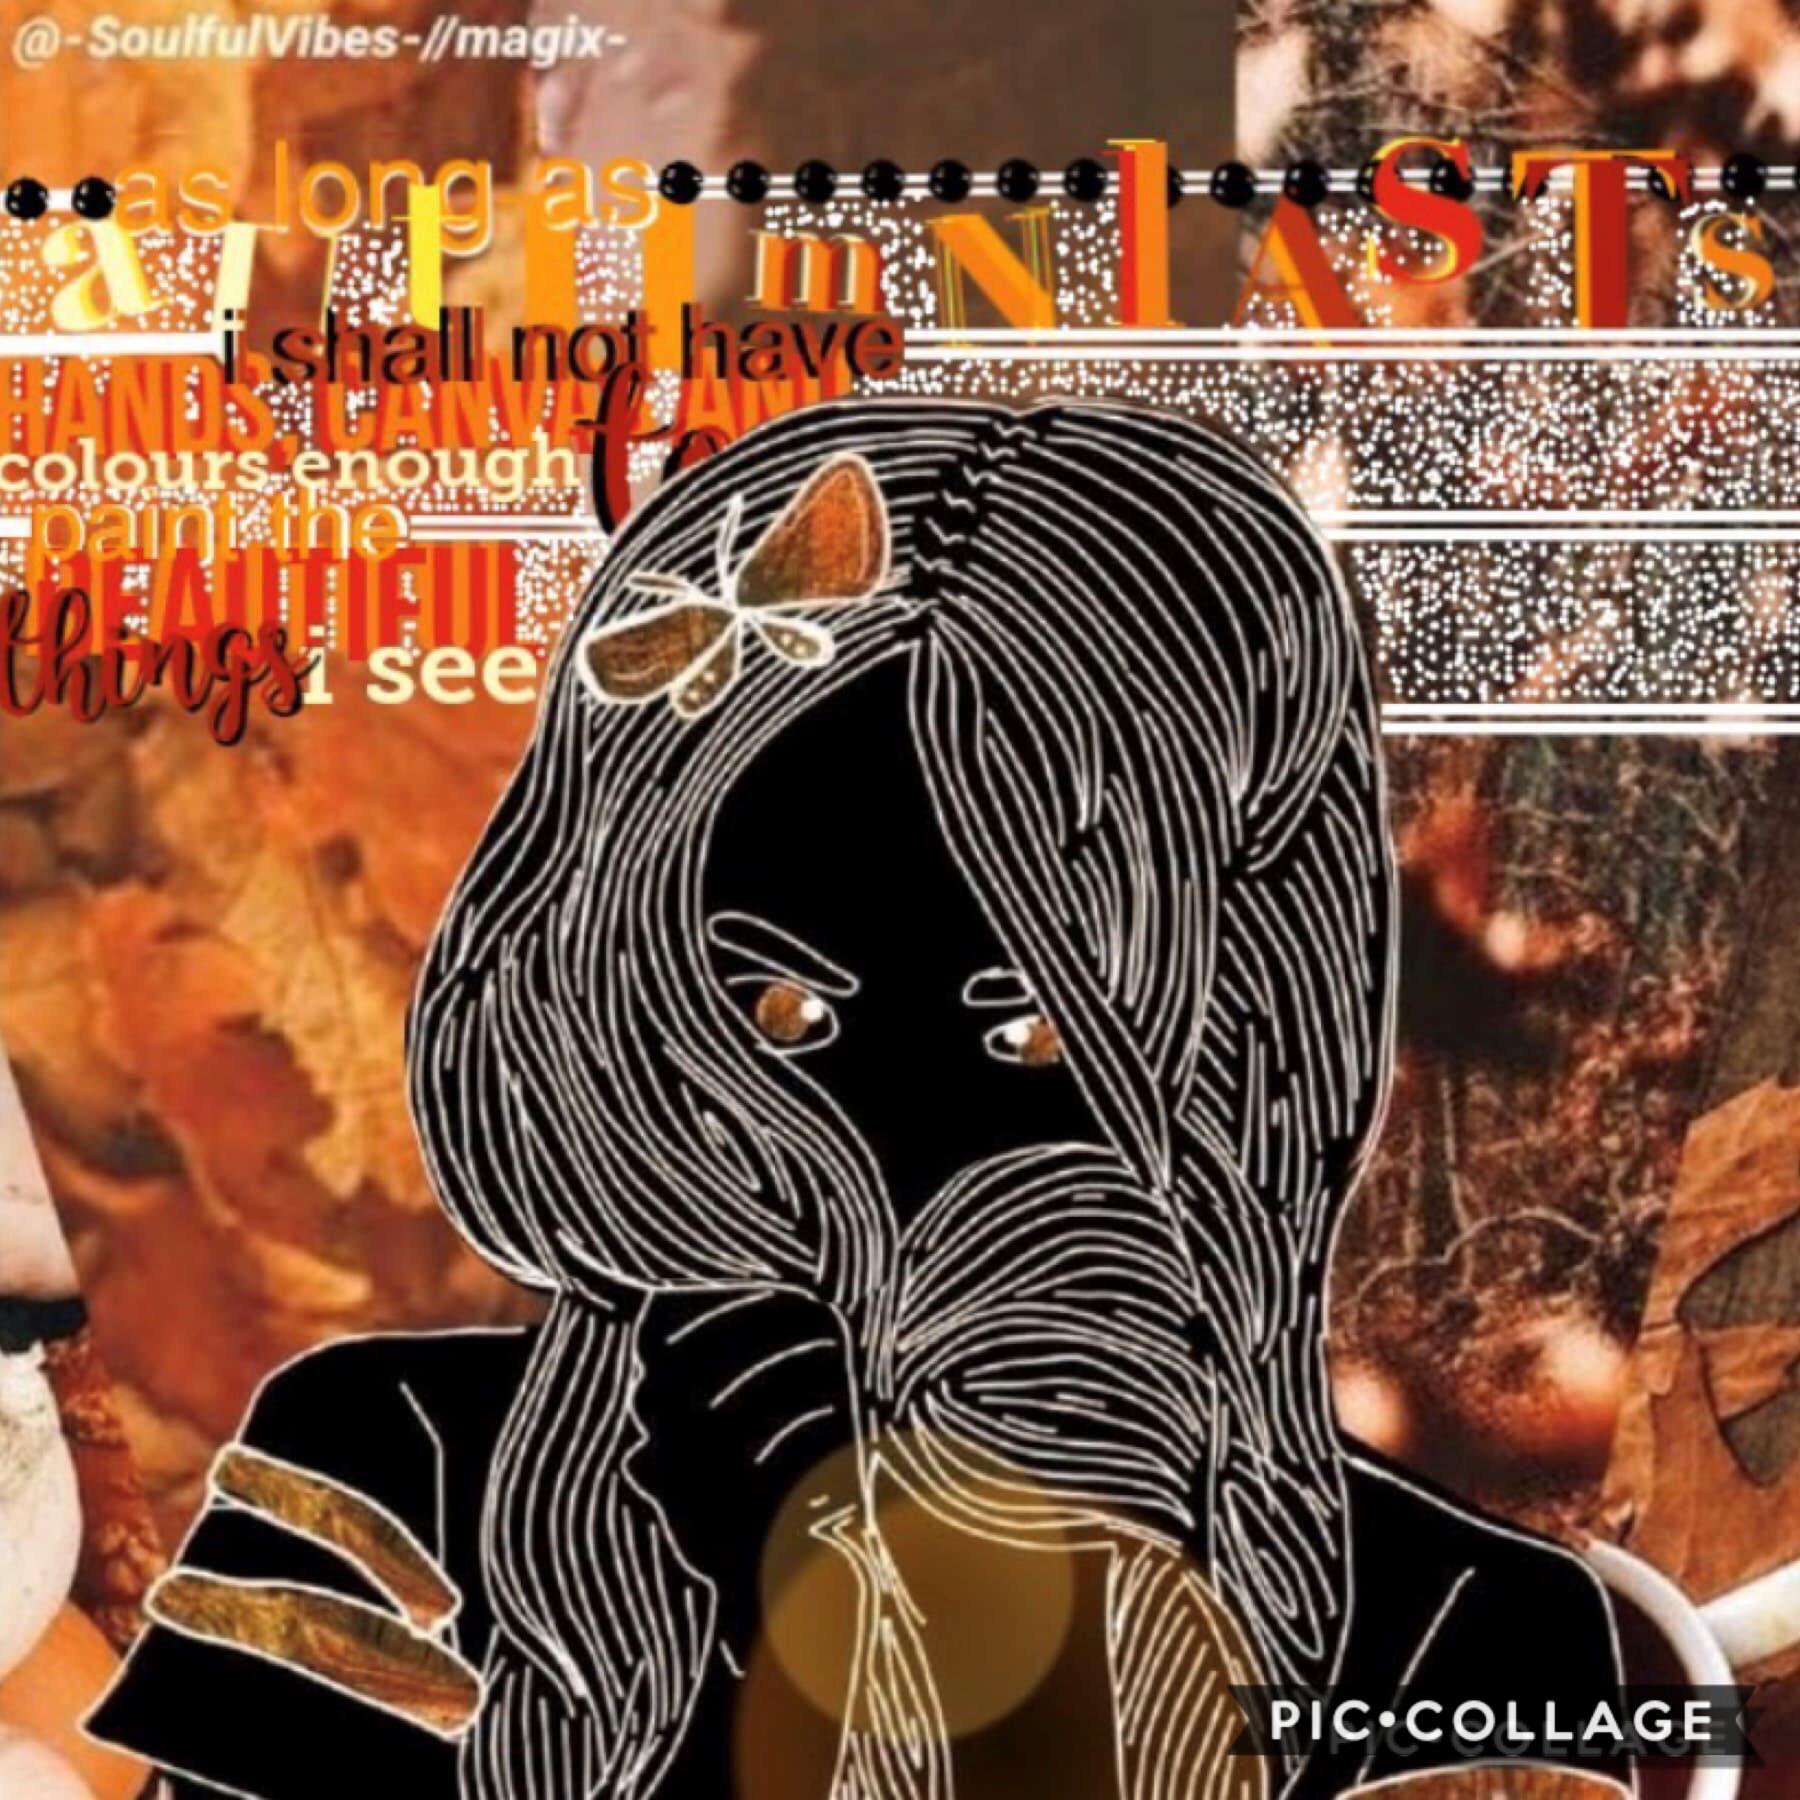 COLLAB WITH MOOOONYYY @magix- tap
she did the amazing texxttt! She’s so amazing go give her a follow🧡
New collage coming out in 2 days🤛🏻
Thank y’all for all your support, it means sooo much to me🧡I love chatting with u guys 